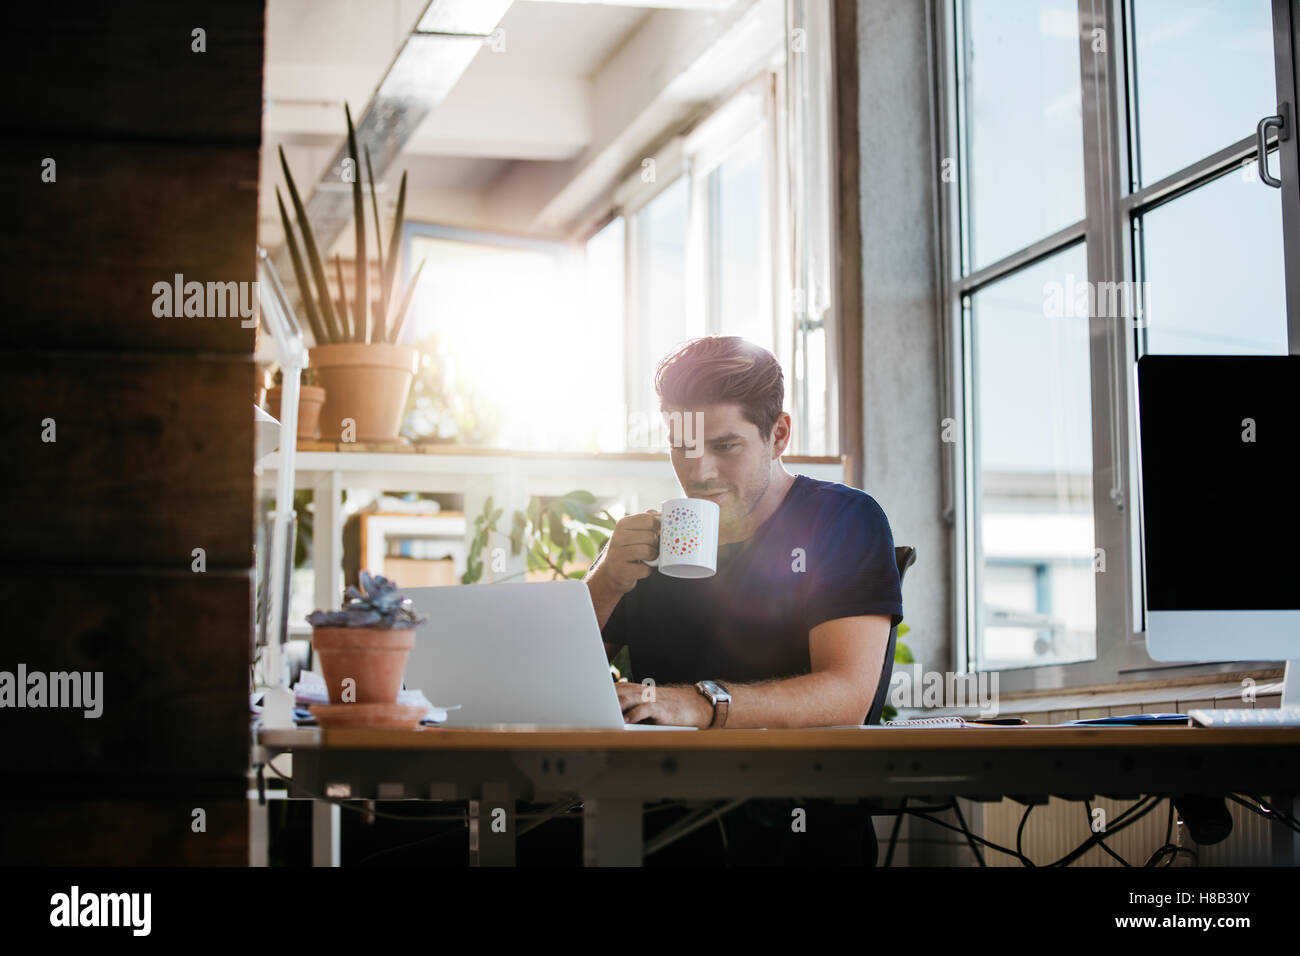 Relaxed young man sitting at his desk working on laptop and drinking coffee. Business man in modern workplace. Stock Photo